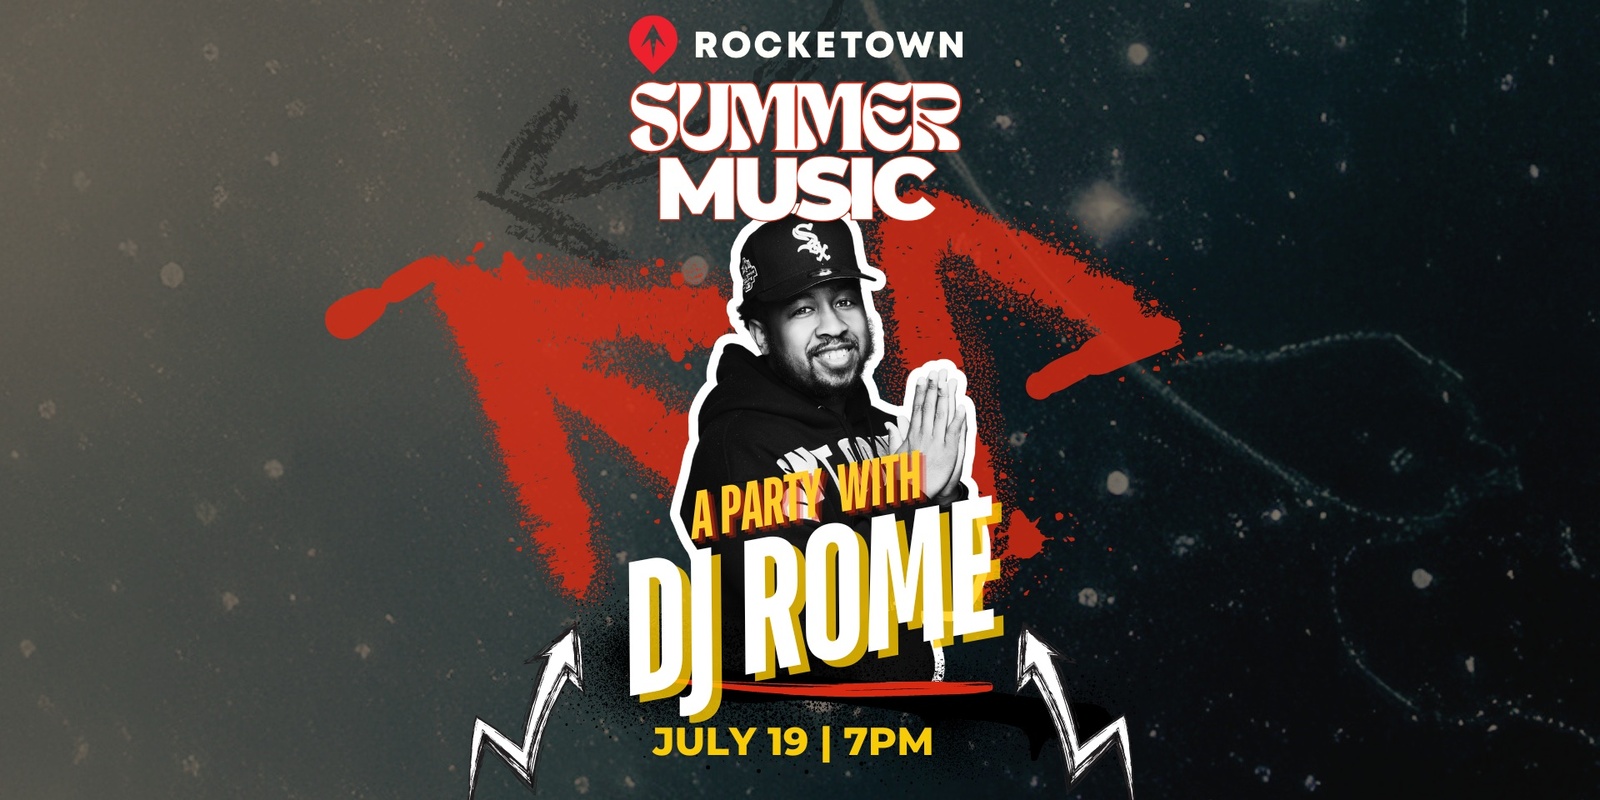 Banner image for Summer Music at Rocketown with DJ Rome